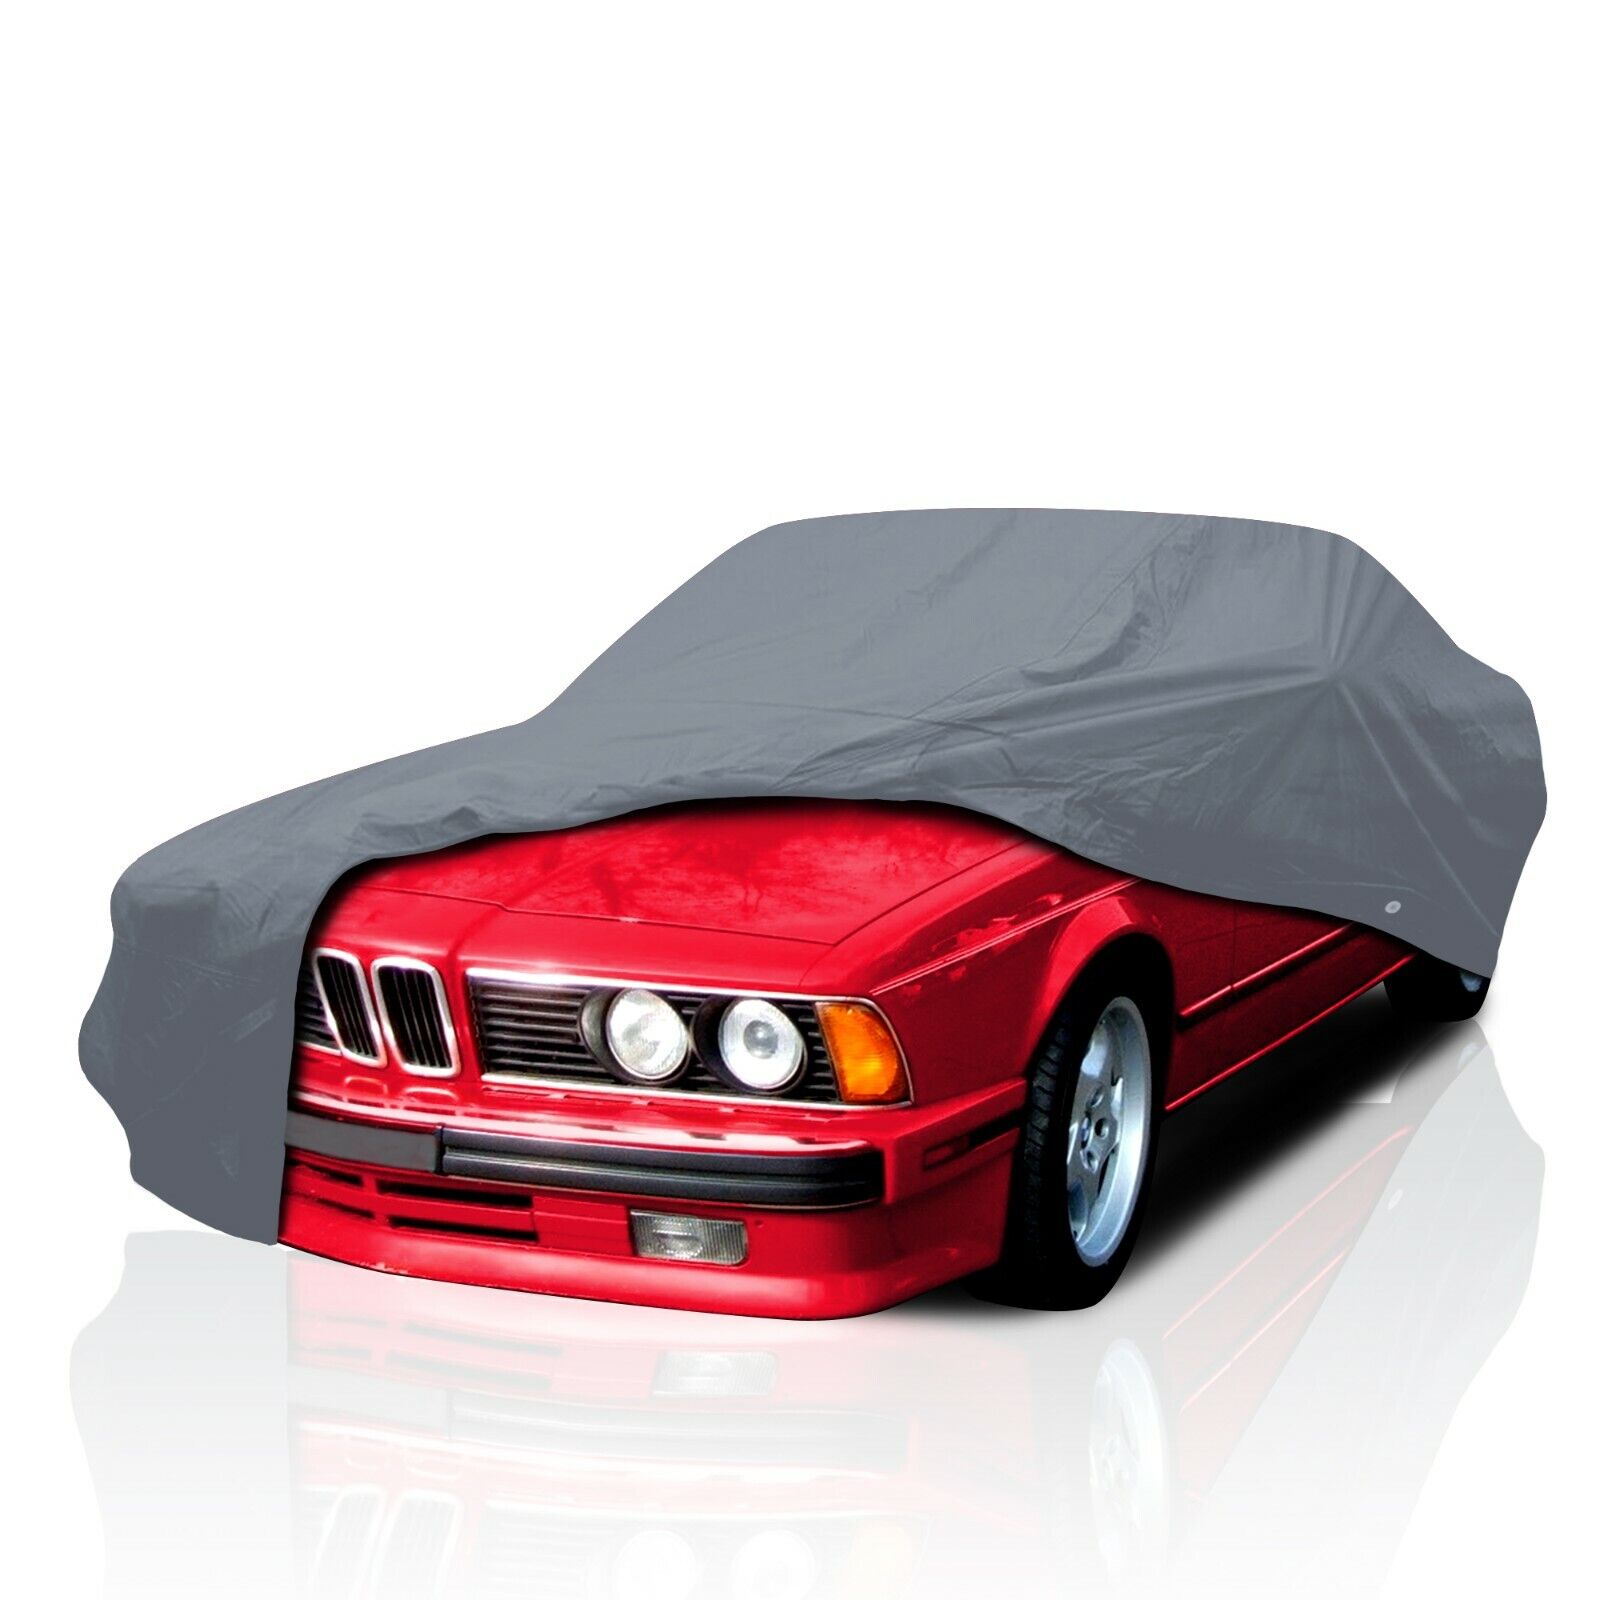 [CCT] 5 Layer Full Car Cover For BMW 3 series E30 1989 1990 1991 1992 1993 1994